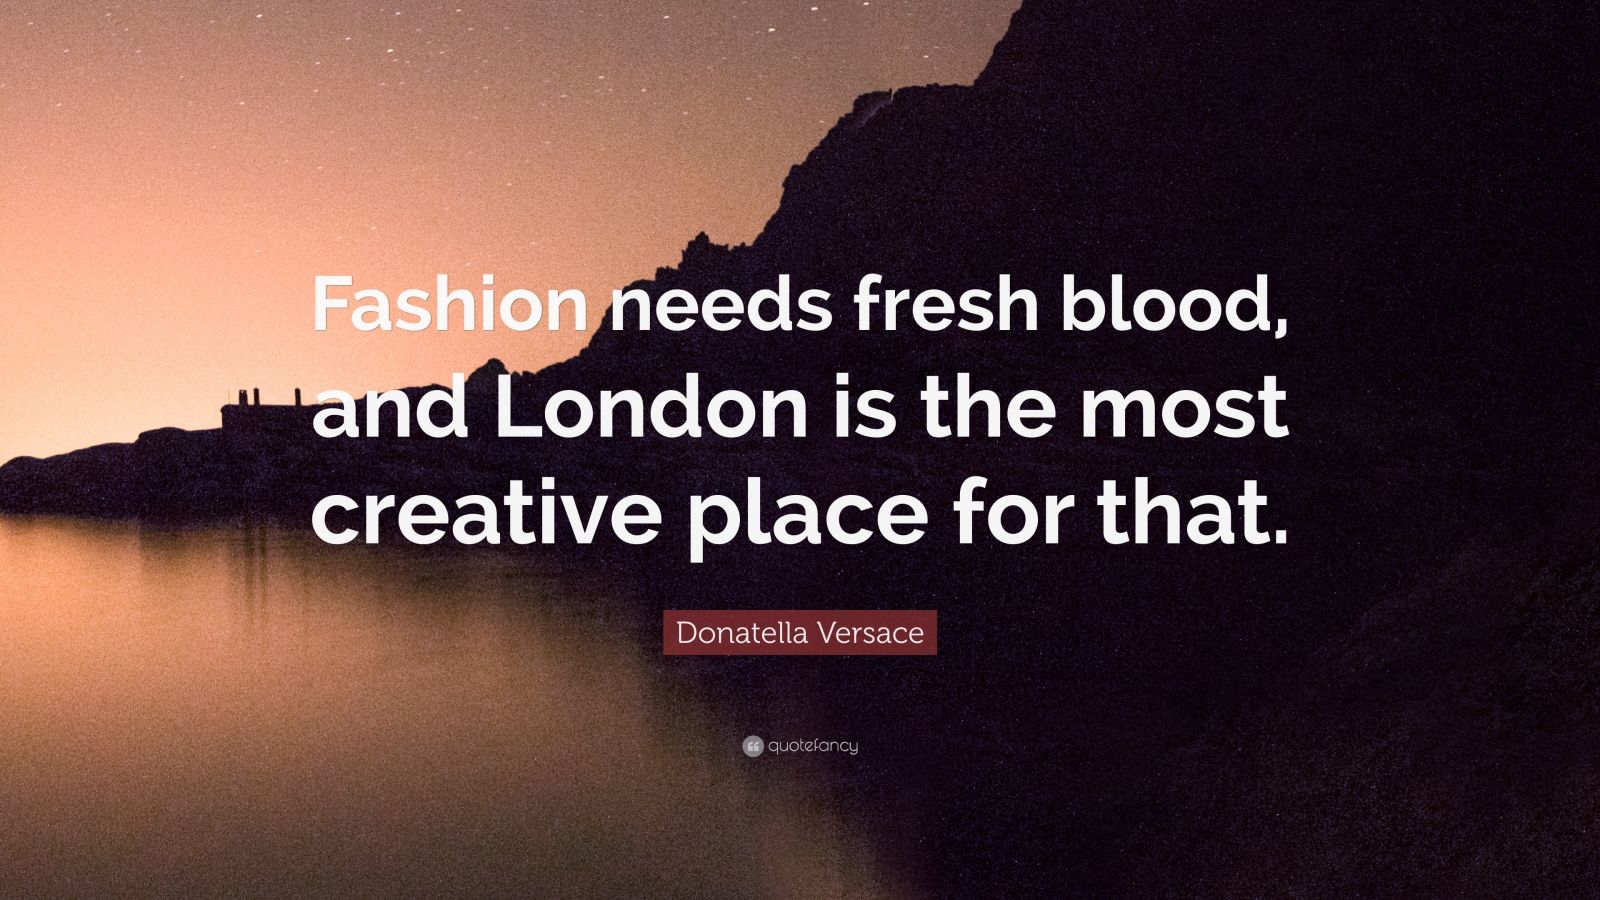 Donatella Versace Quote: "Fashion needs fresh blood, and London is the most creative place for ...